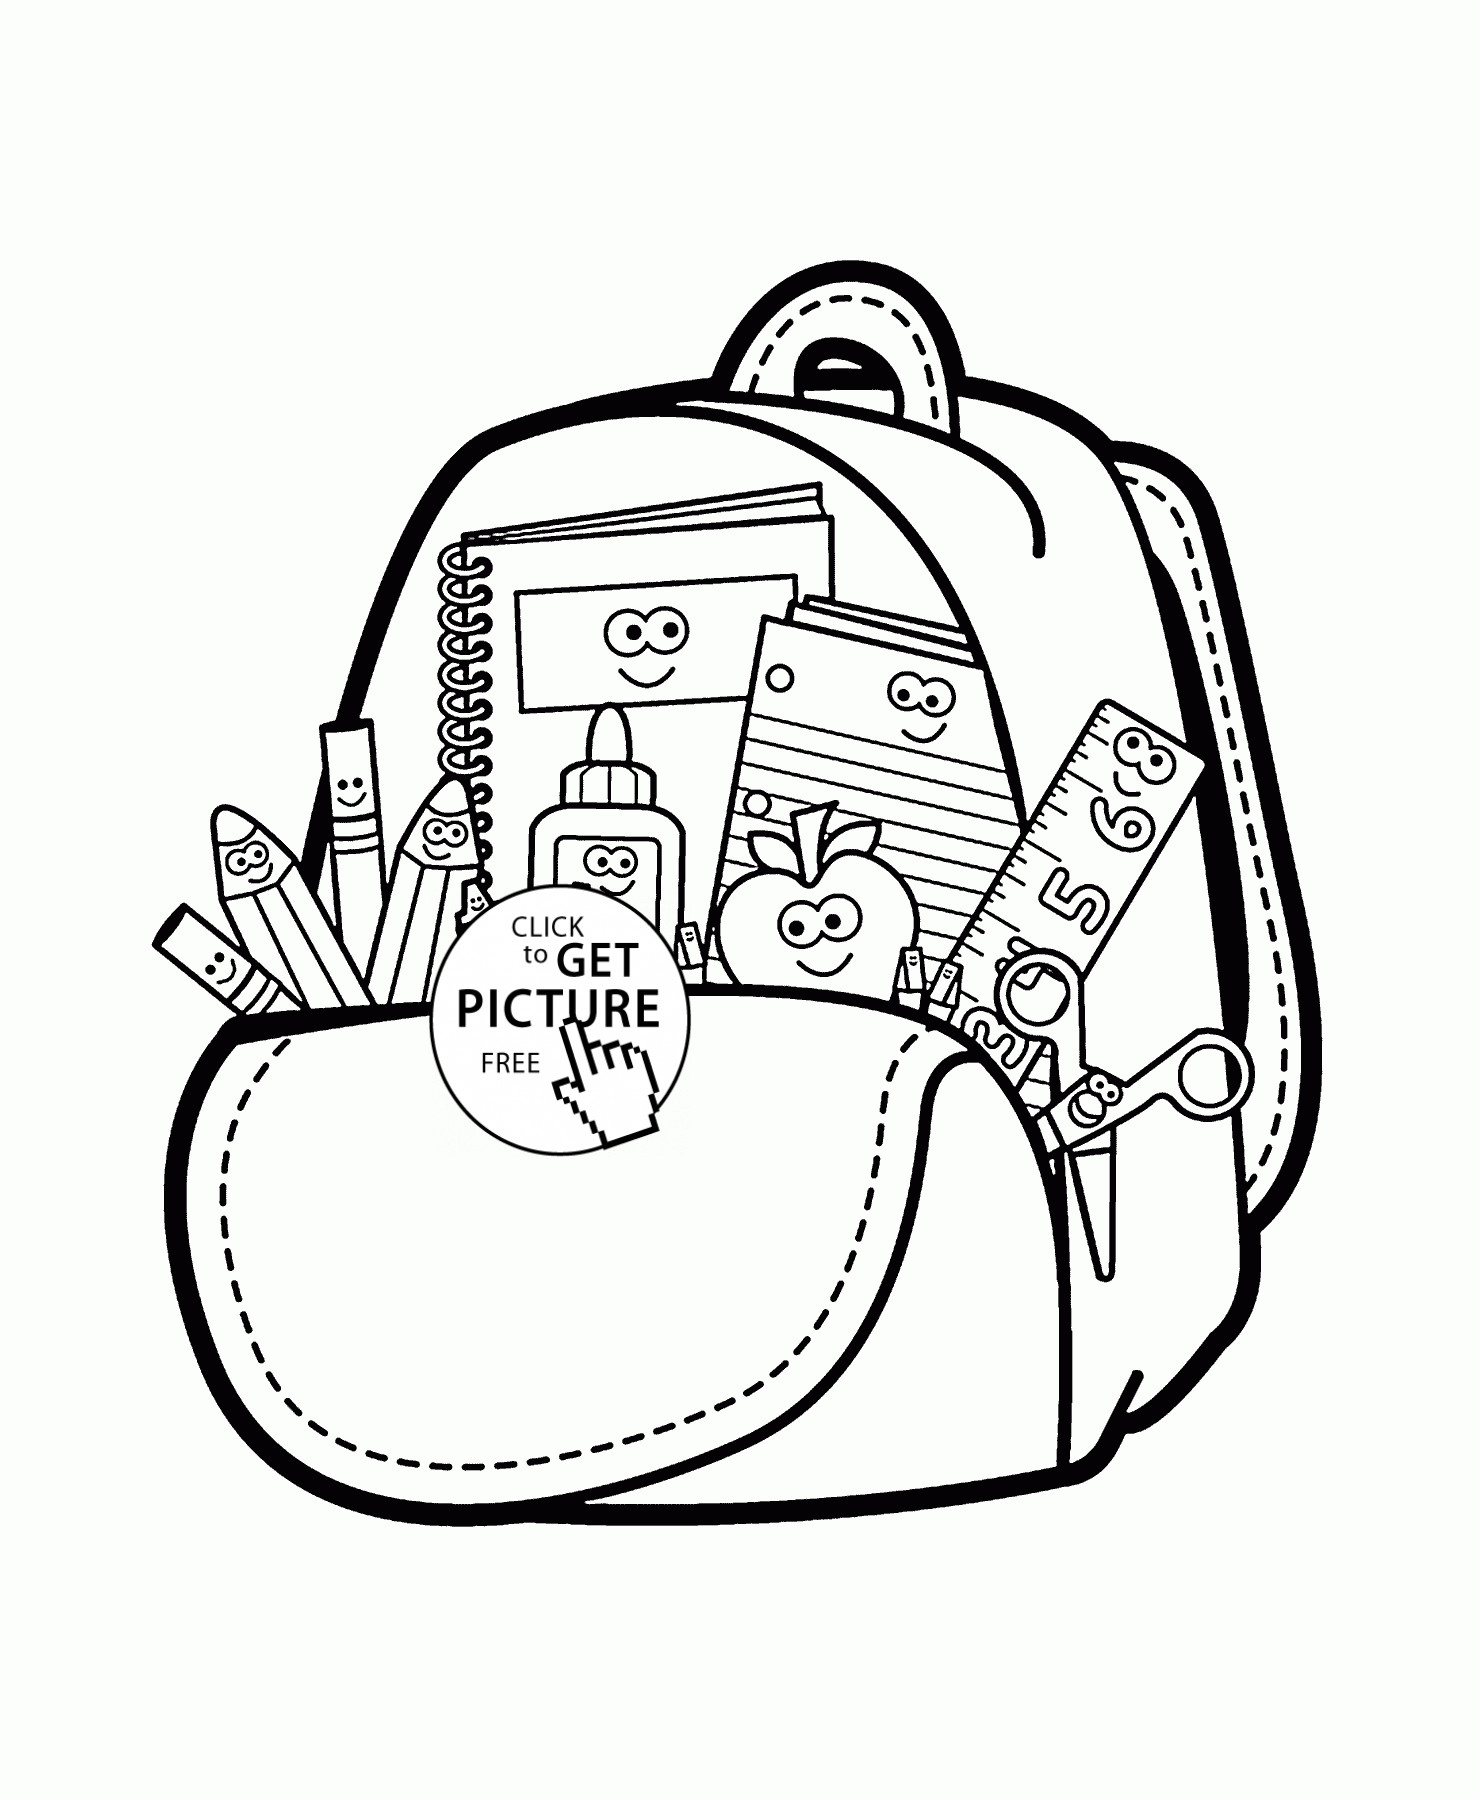 Cartoon School Supplies coloring page for kids back to